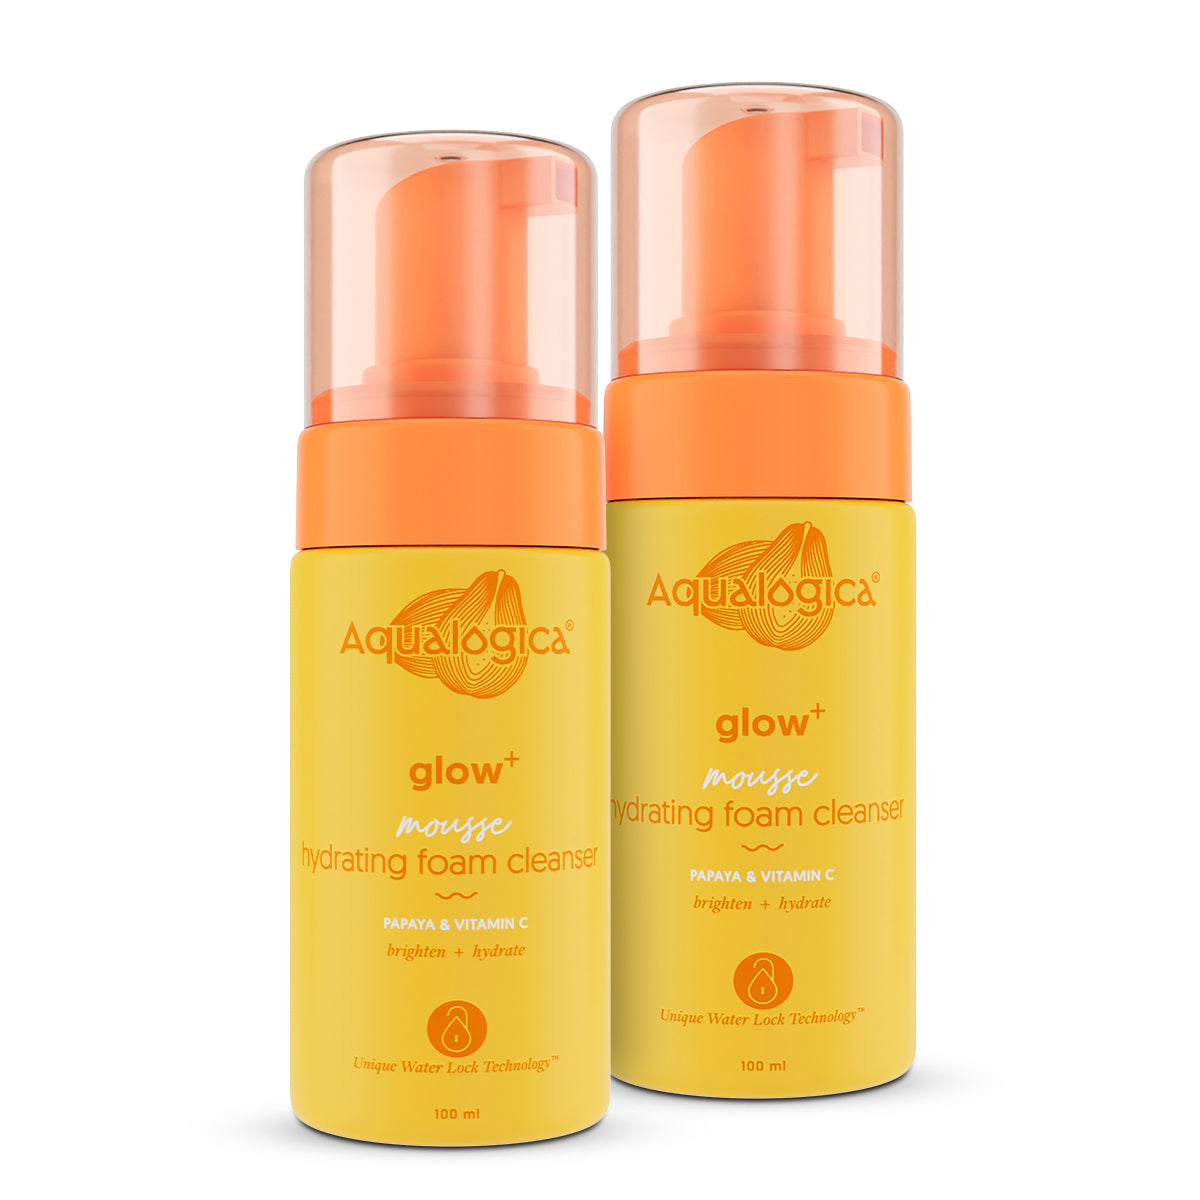 Glow+ Mousse Hydrating Foam Cleanser - 100 ml (Pack of 2)